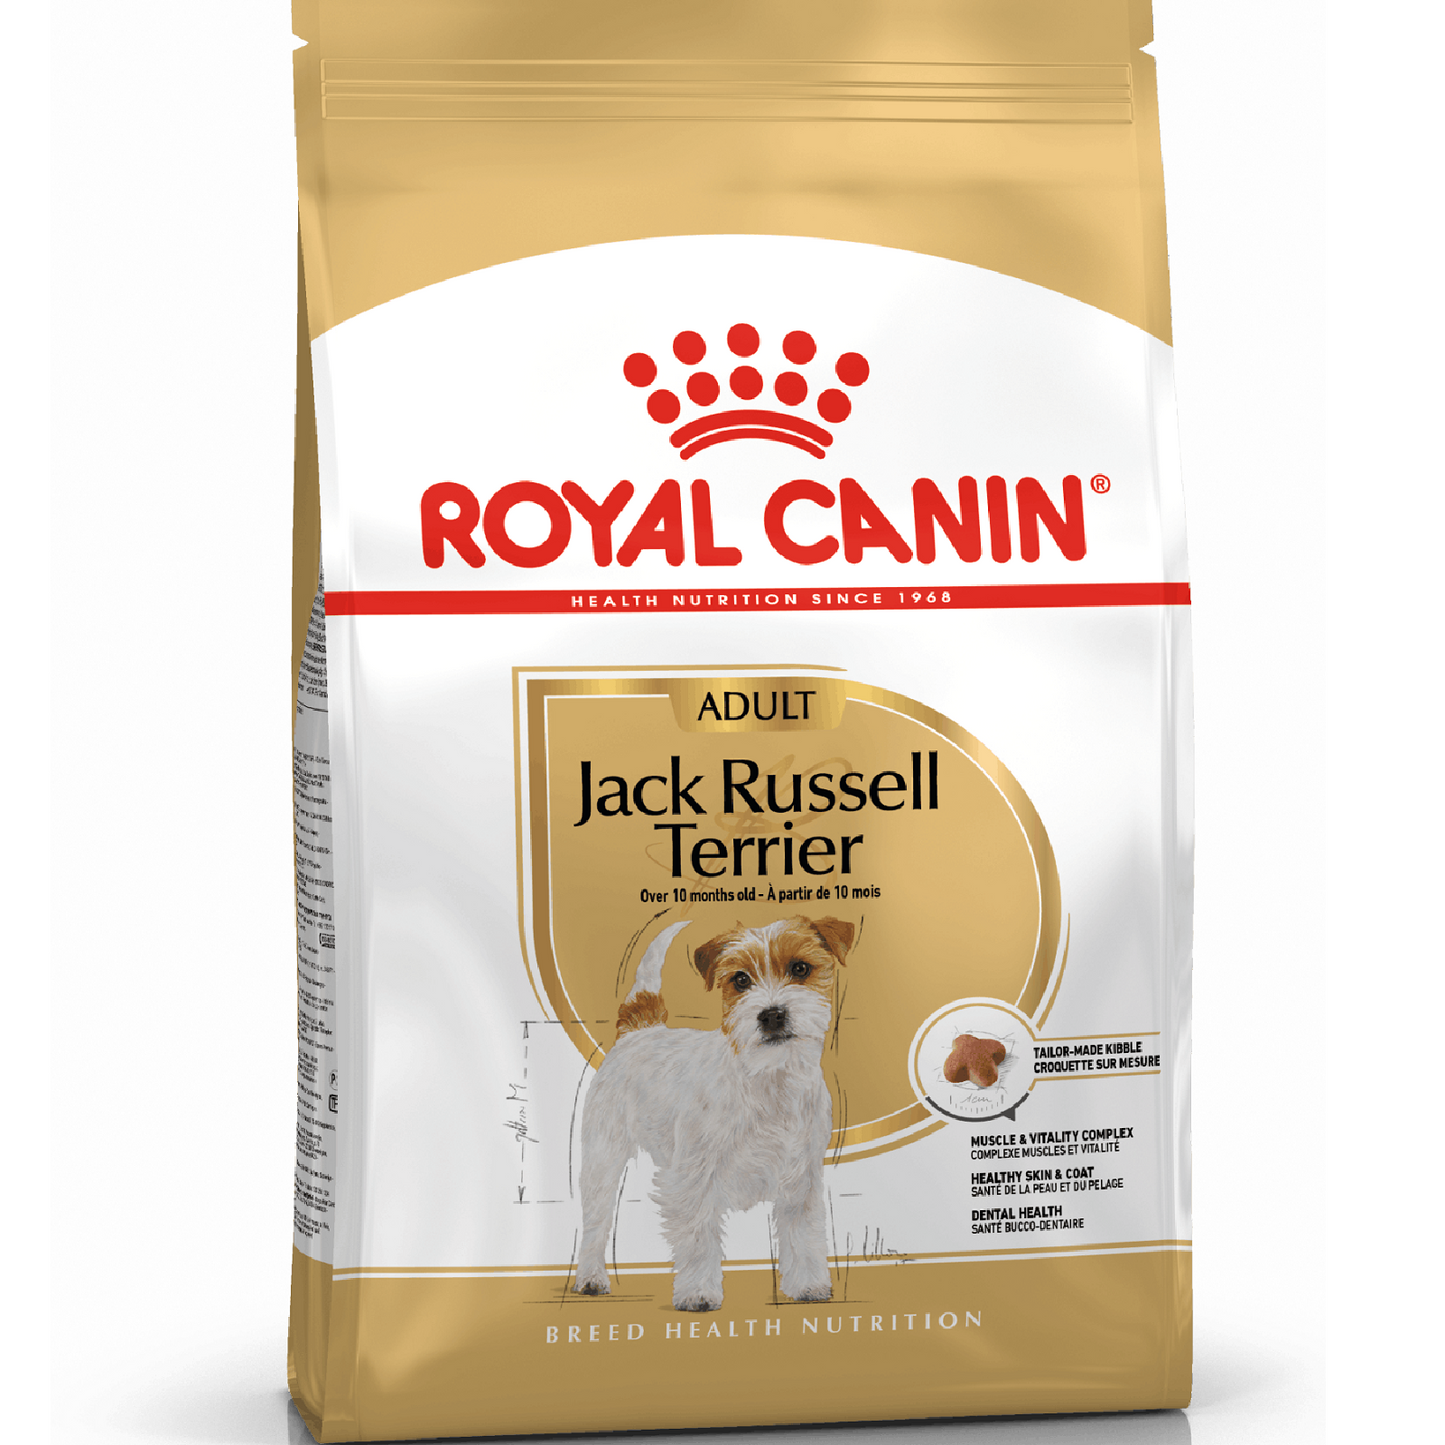 ROYAL CANIN - Jack Russell Terrier Adult